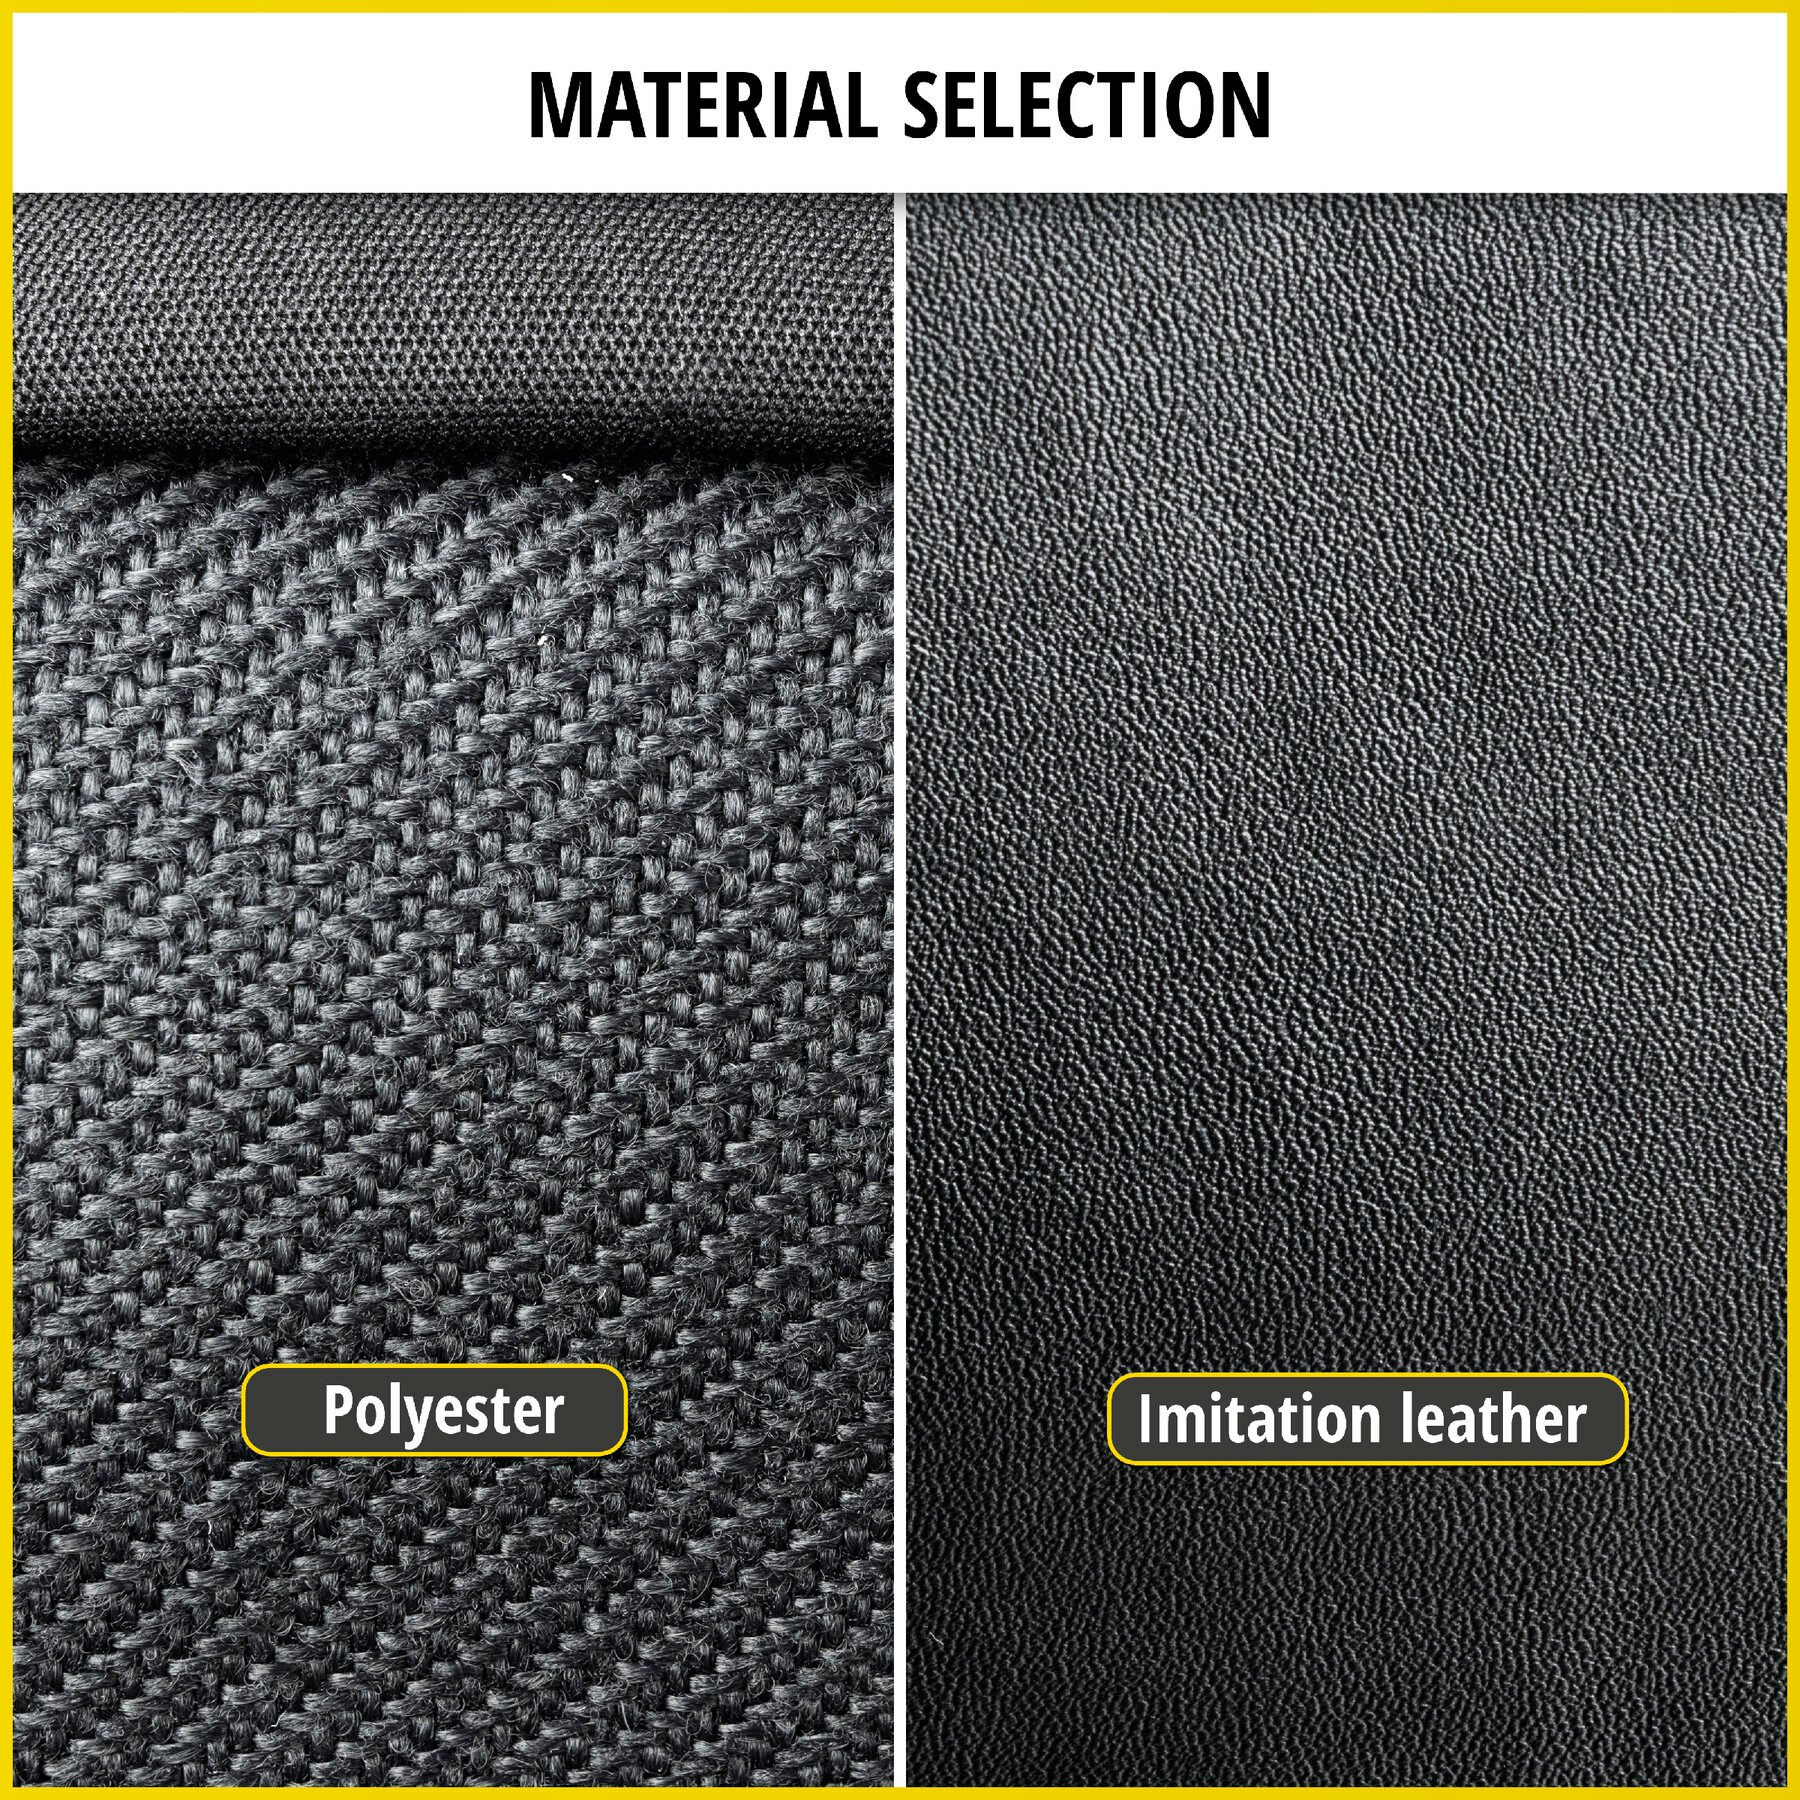 Seat cover made of imitation leather for Mercedes-Benz Citan W415, 2 single seat covers front